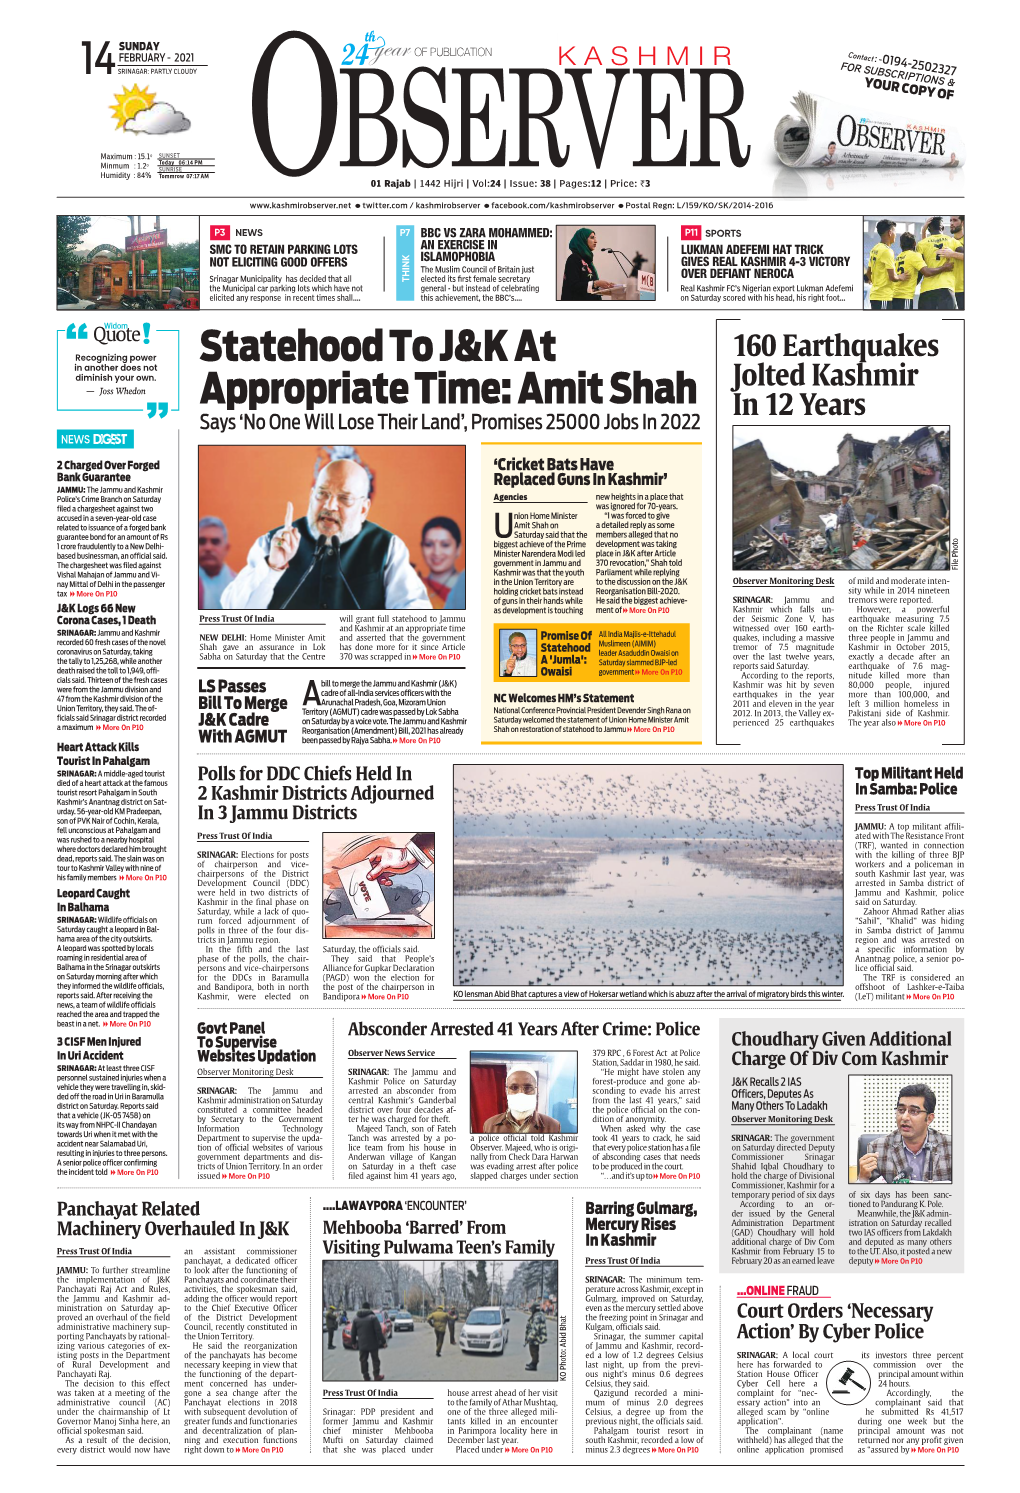 Statehood to J&K at Appropriate Time